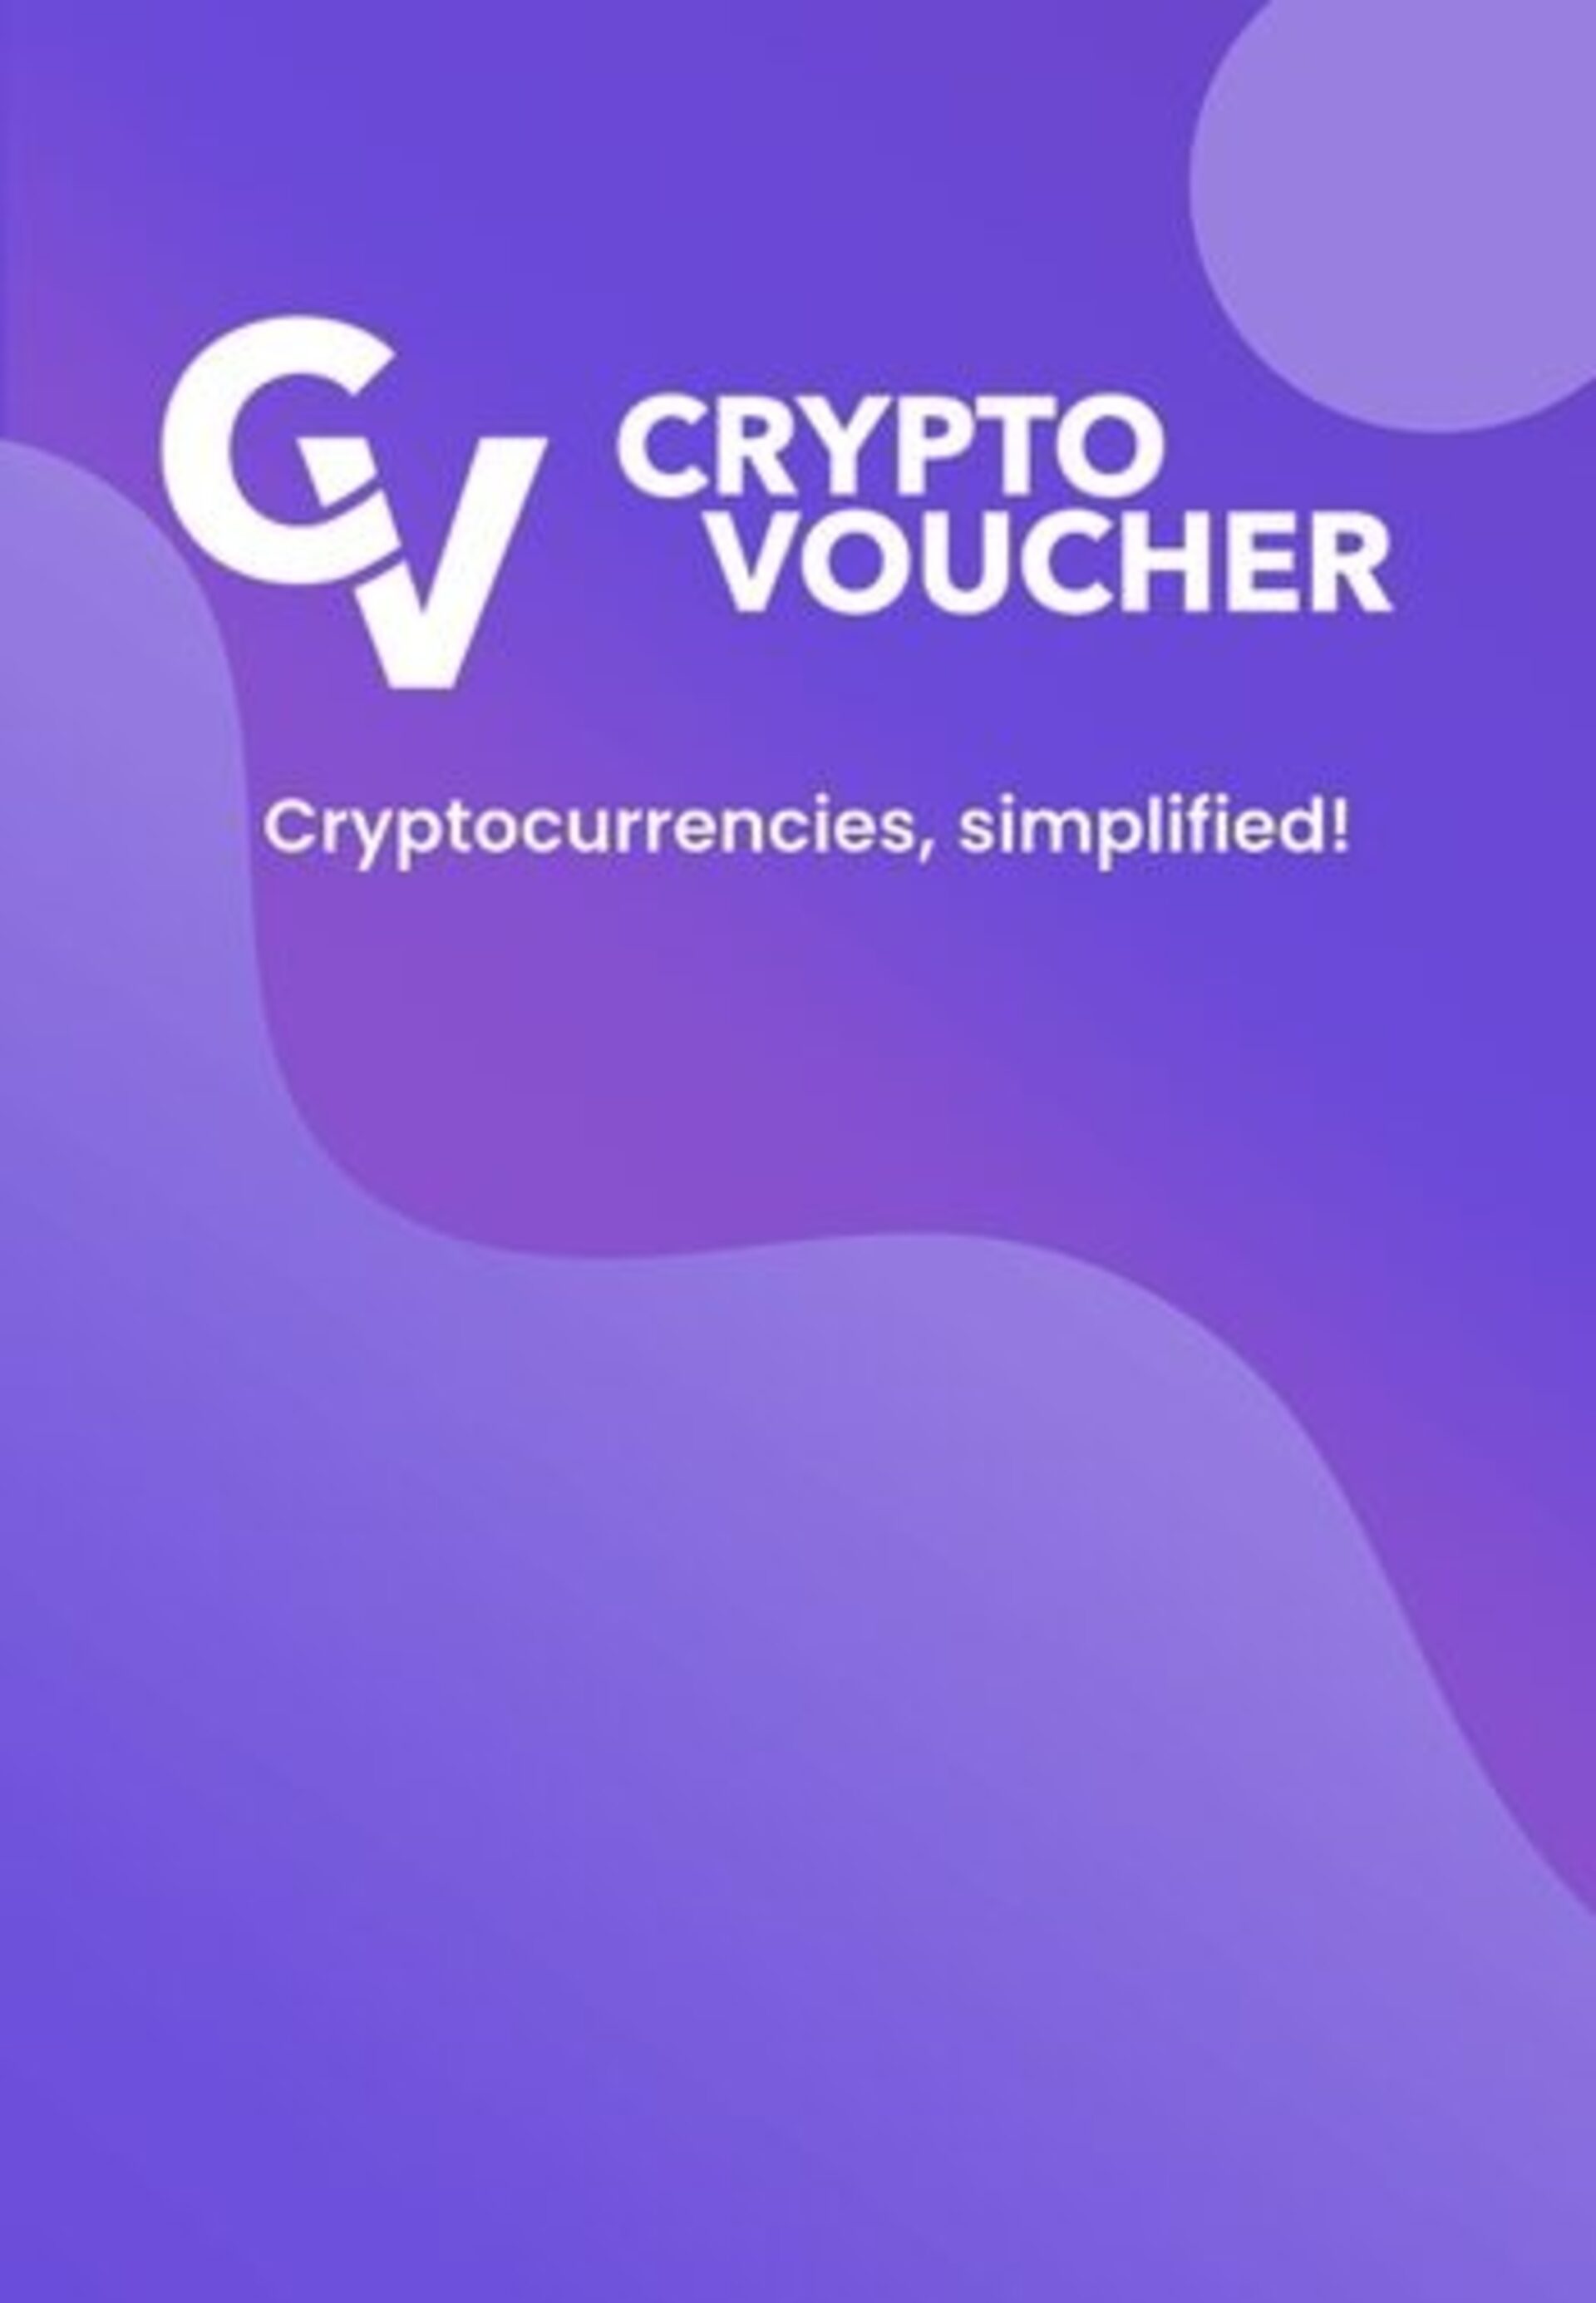 Azteco bitcoin vouchers. For every bit of life.